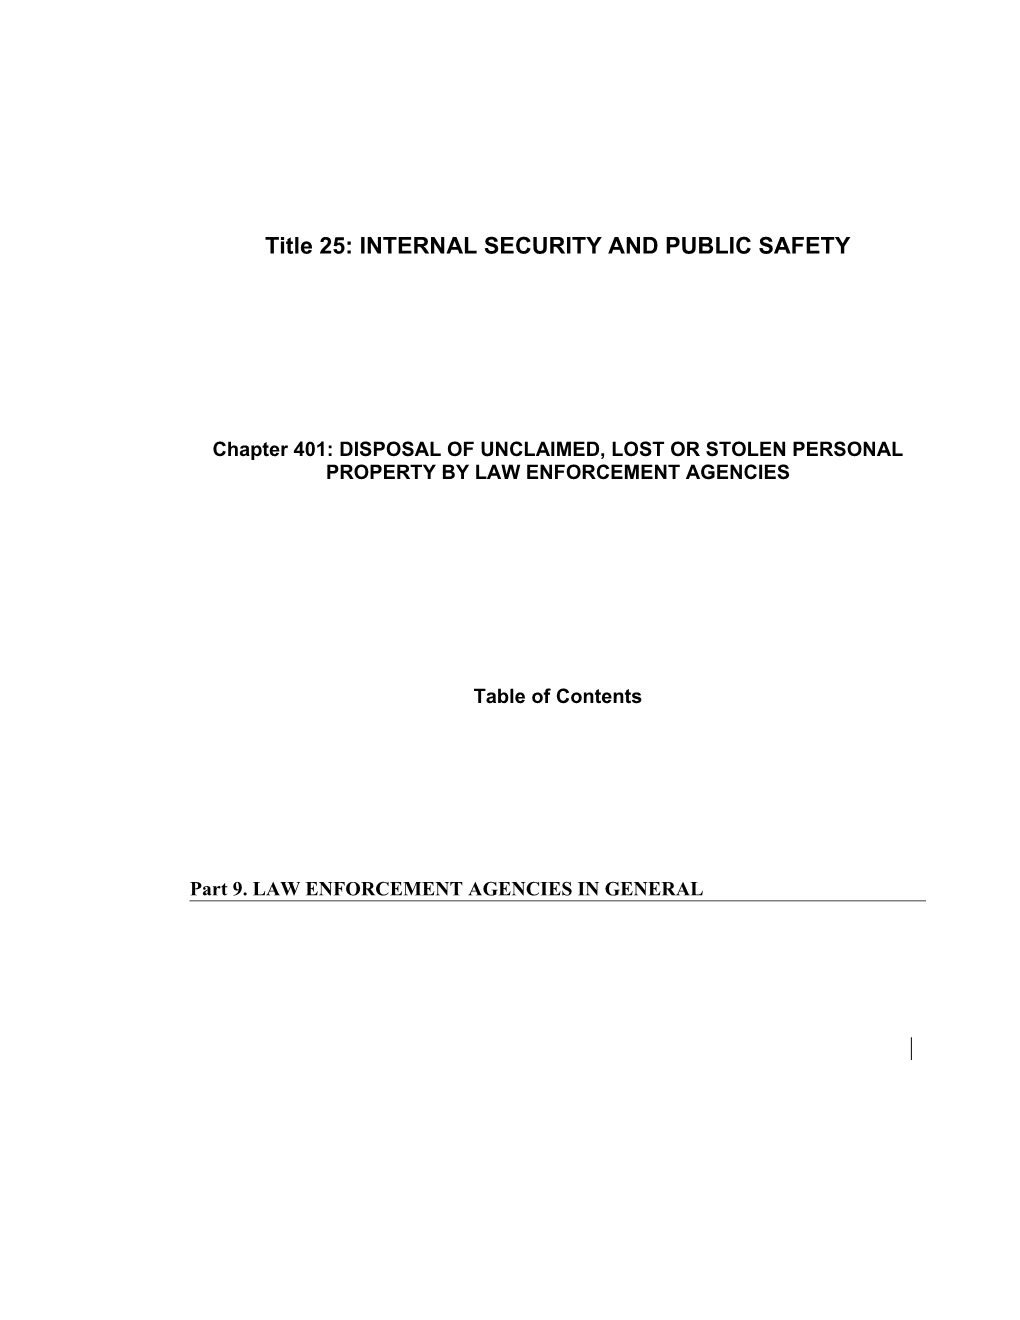 Title 25: INTERNAL SECURITY and PUBLIC SAFETY